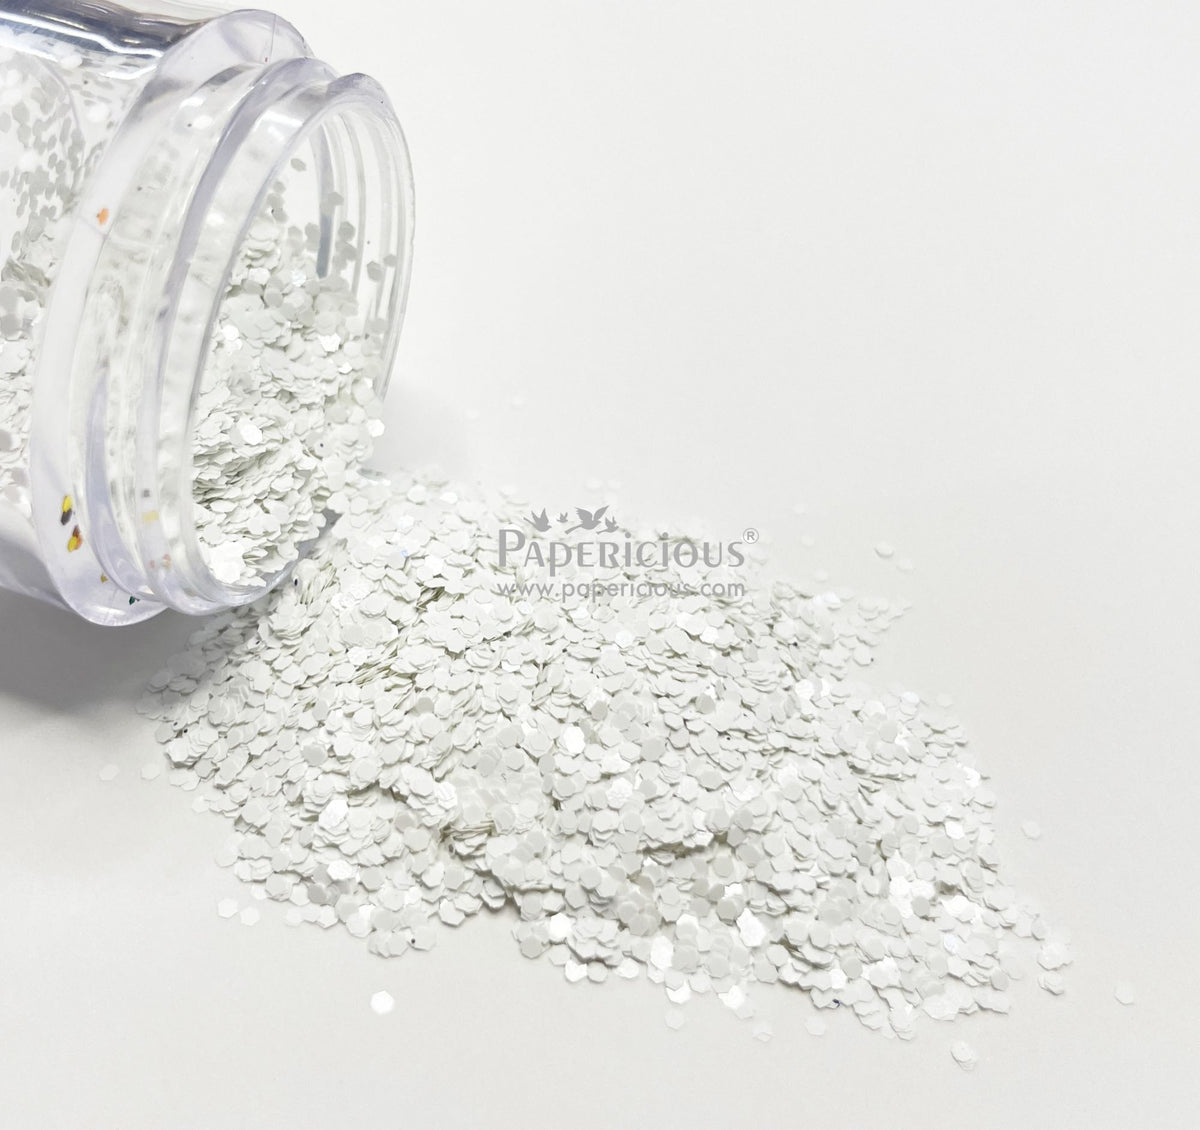 PAPERICIOUS - Dazzling White - Chunky Glitters- 13 gm